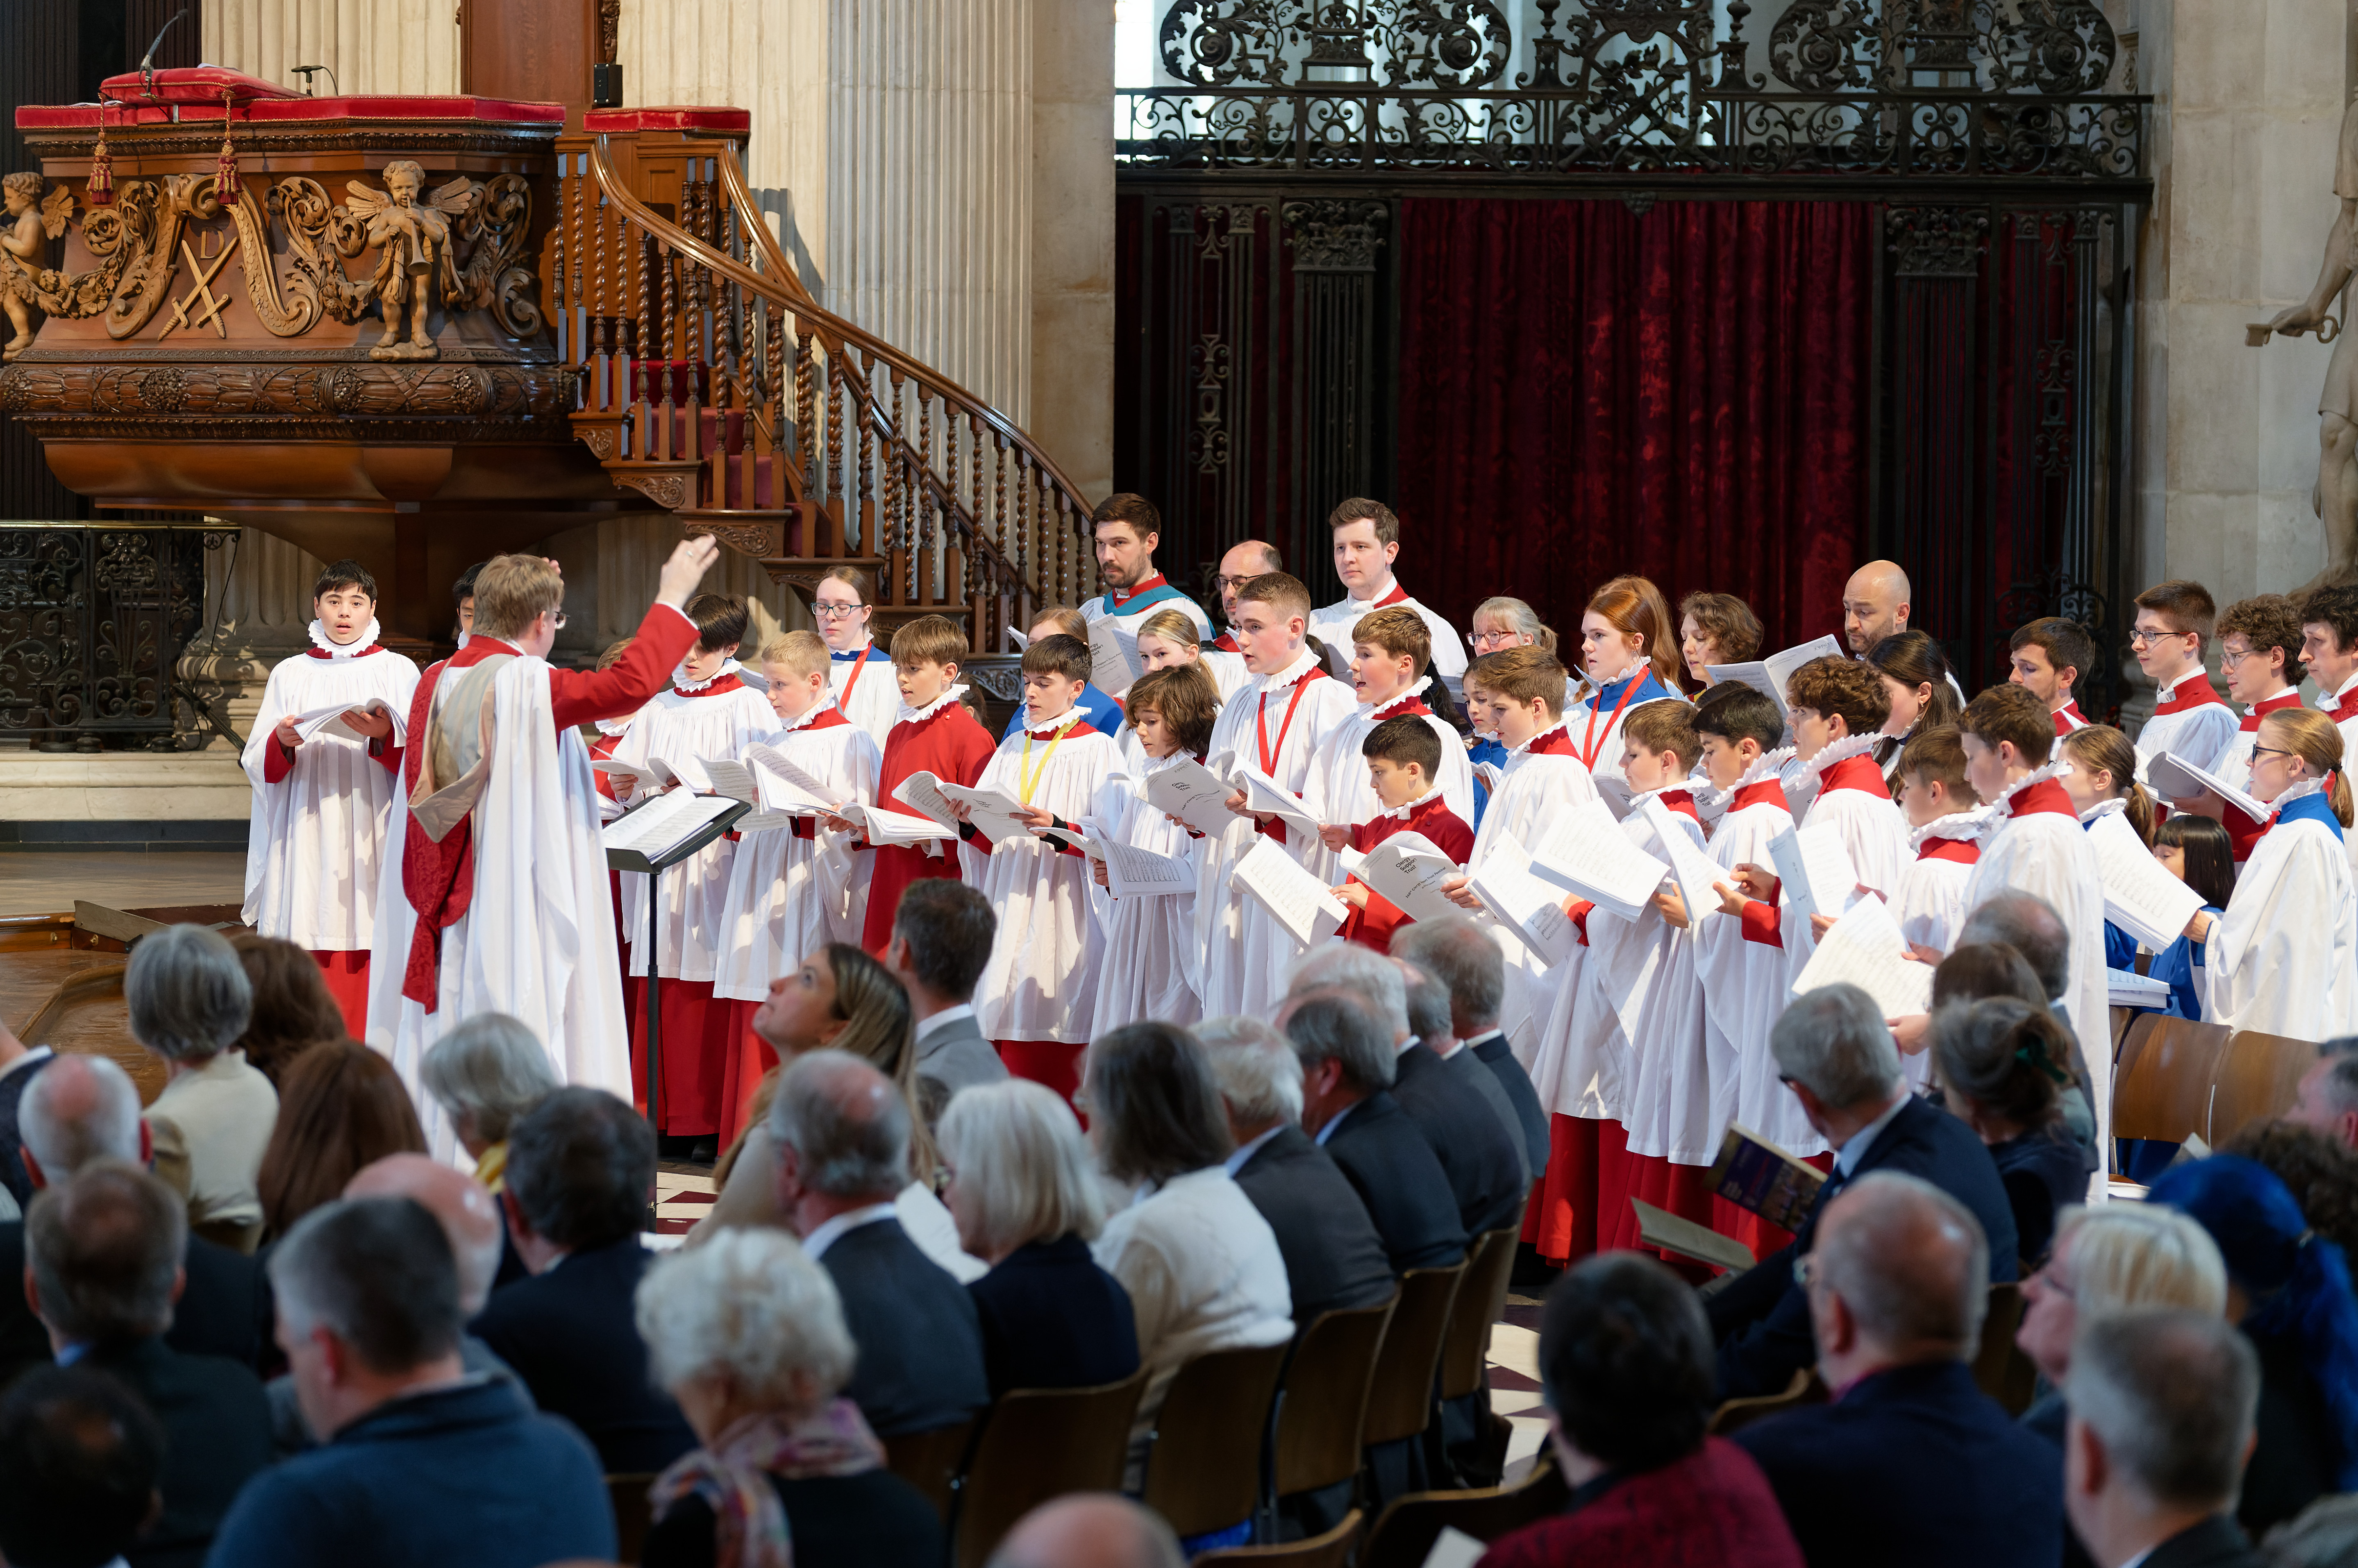 A choir of young people, dressed in red and white robes, performing, led by a choir master to a seated audience.